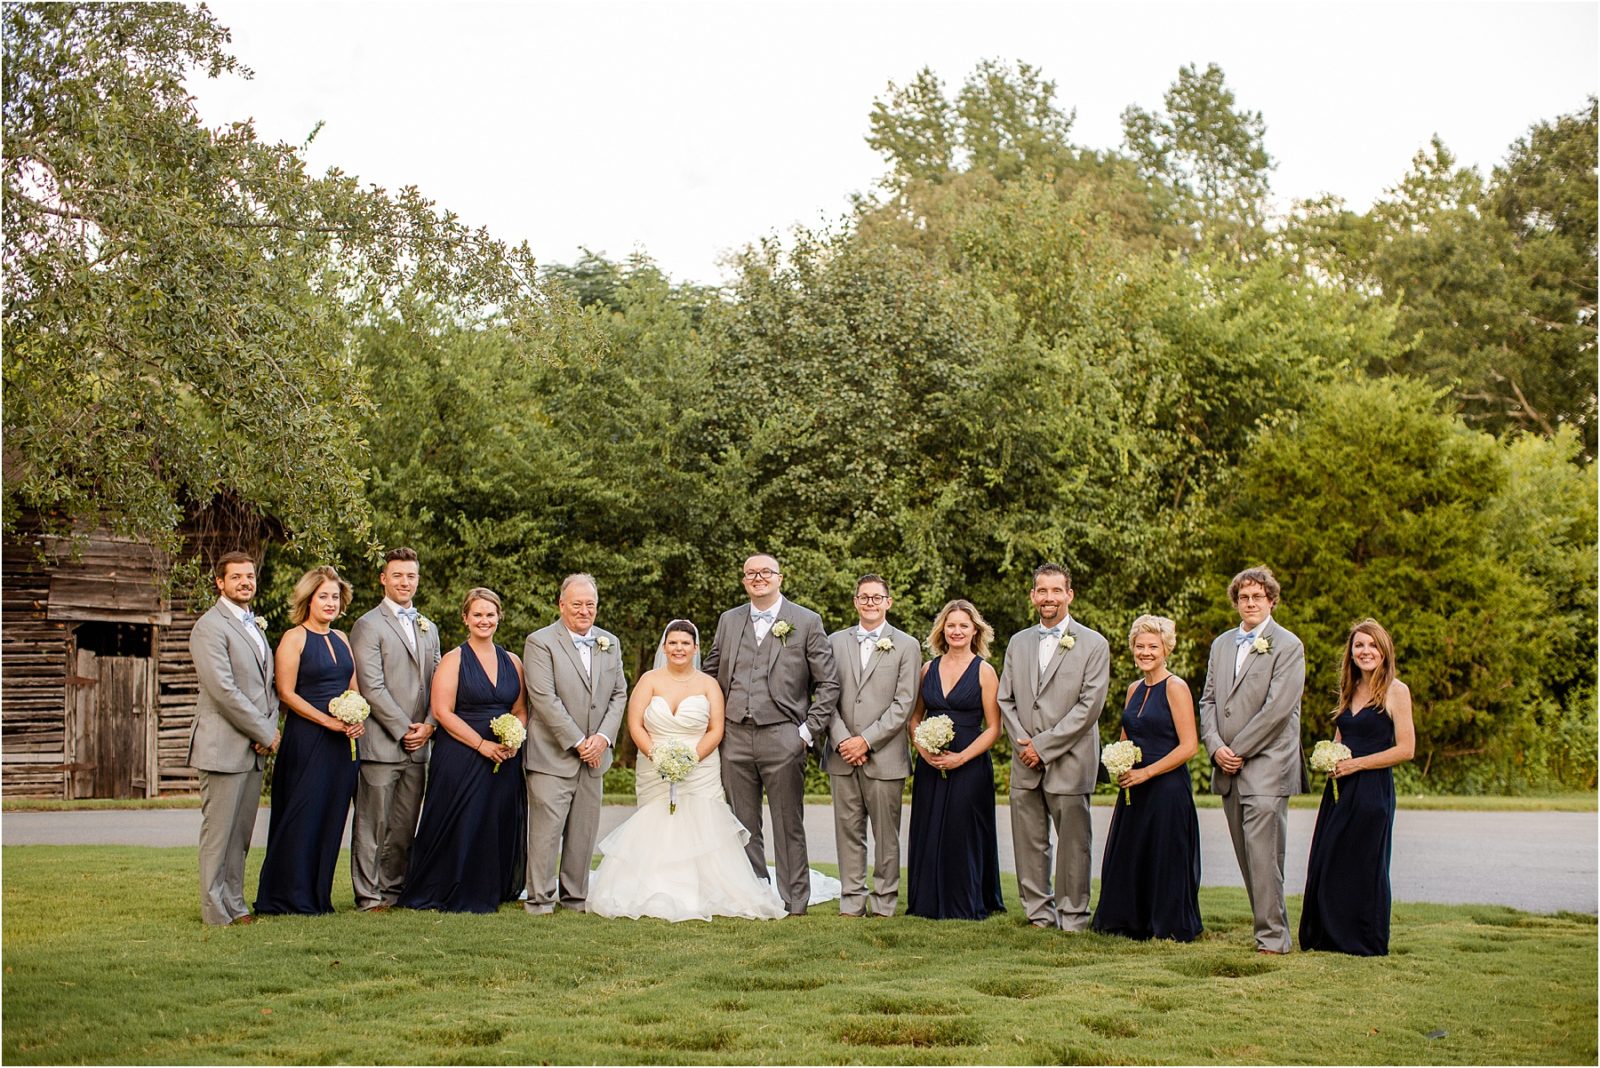 Full bridal party in wedding clothes